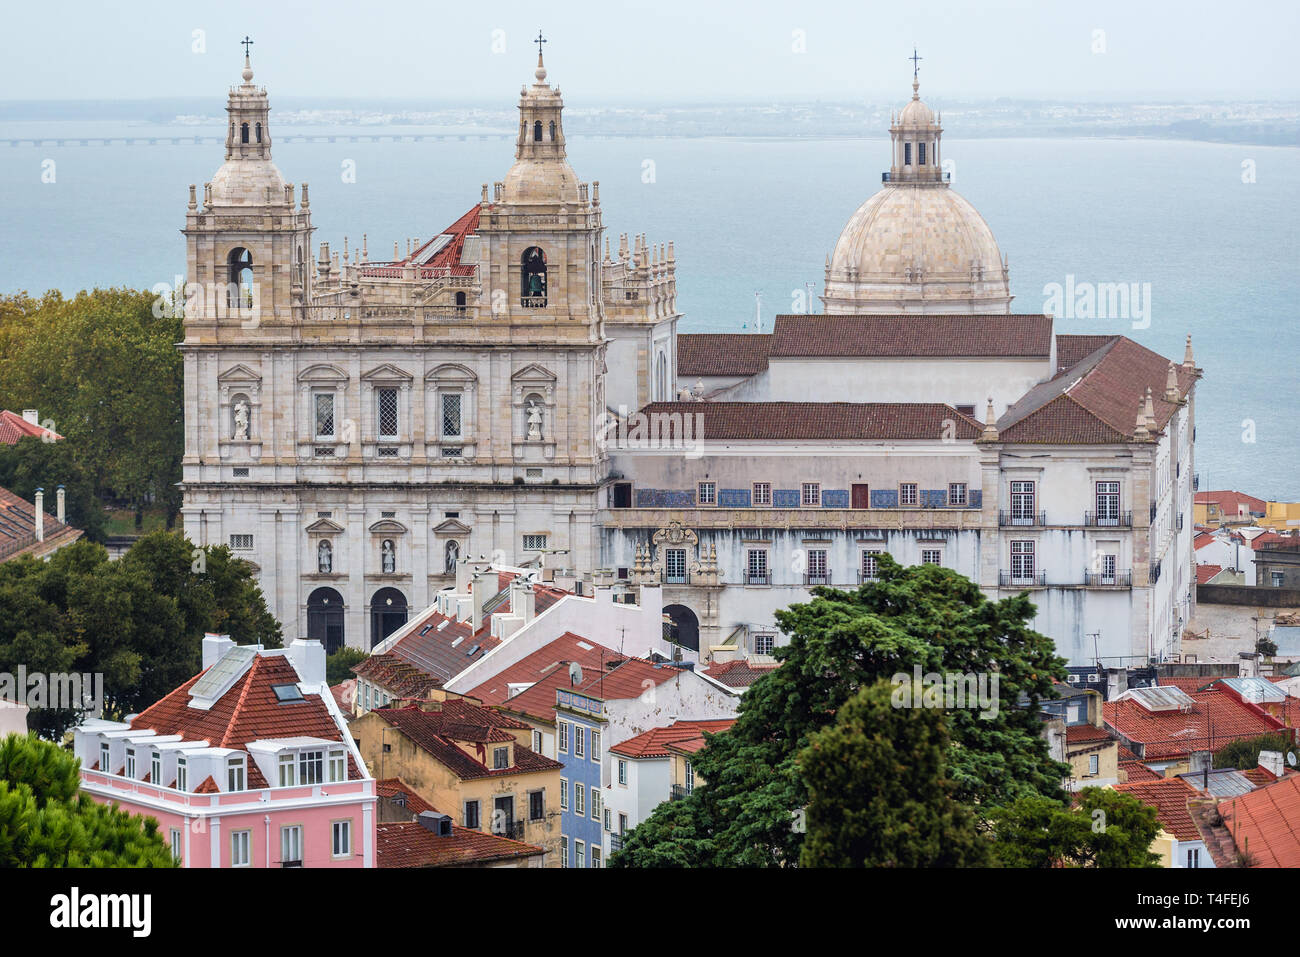 Monastery of Sao Vicente de Fora and dome of National Pantheon seen from Castelo de Sao Jorge citadel in Lisbon, Portugal Stock Photo